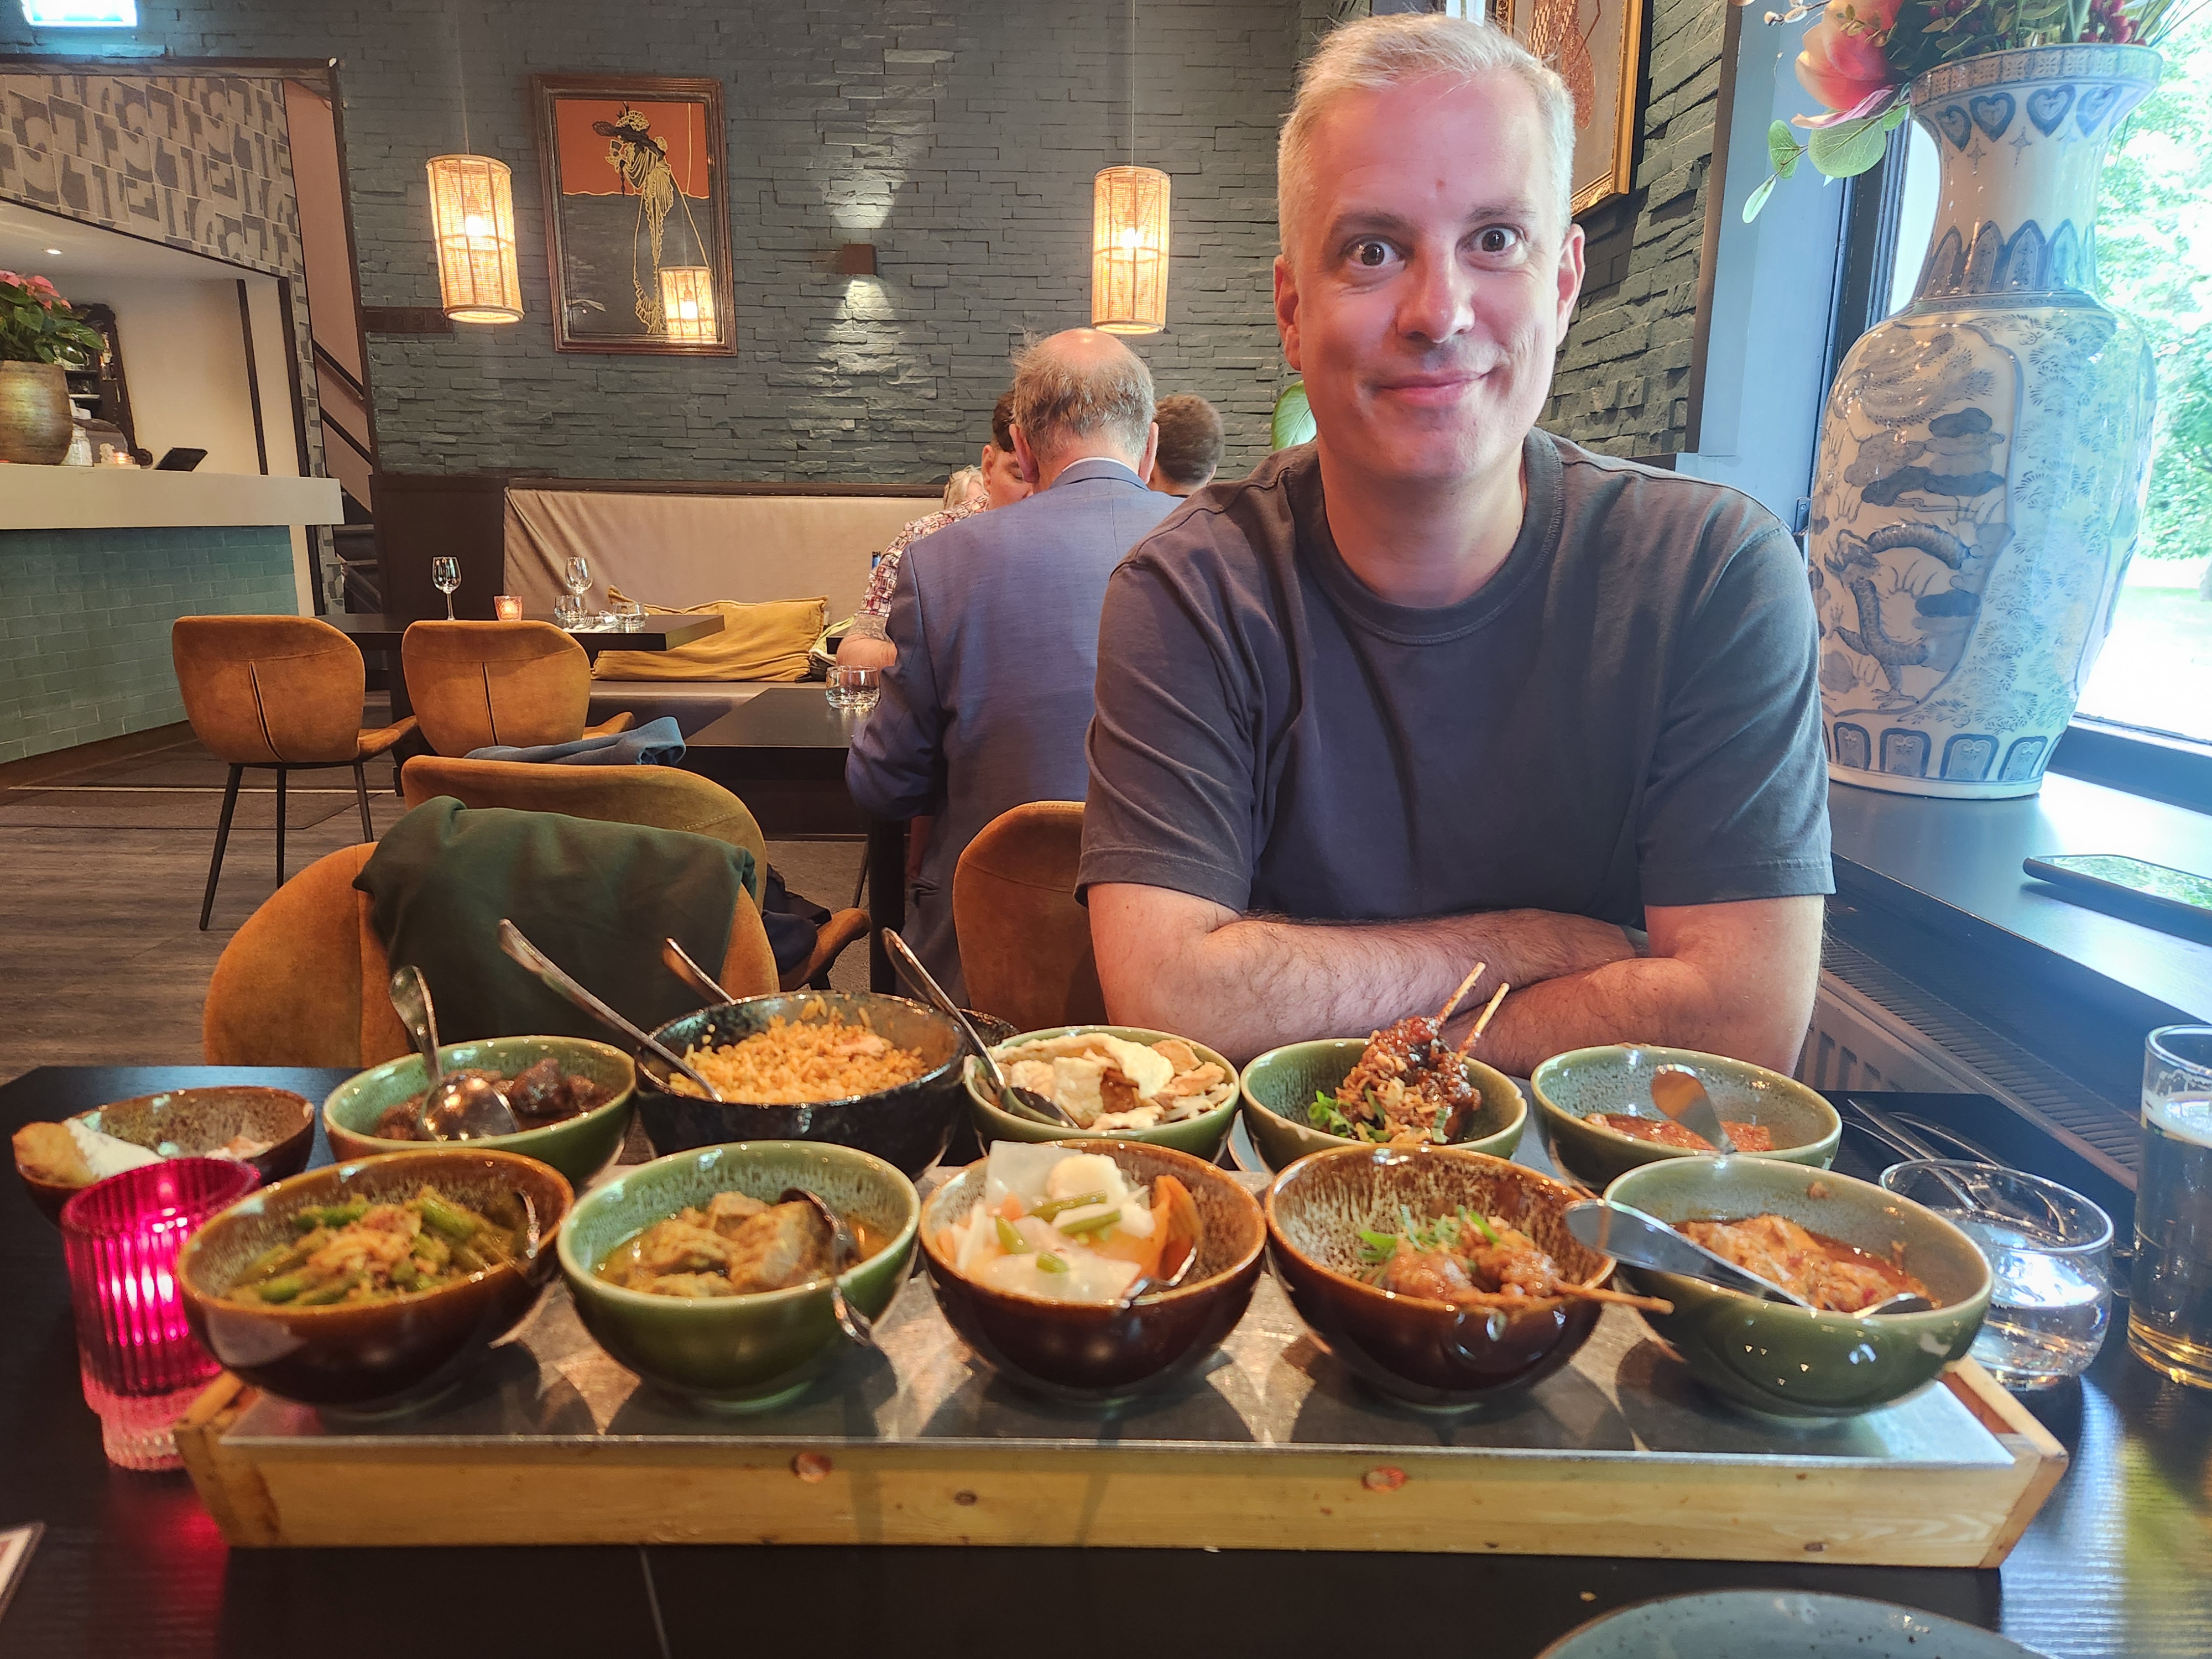 Mark looking very excited at a table full of Indonesian food